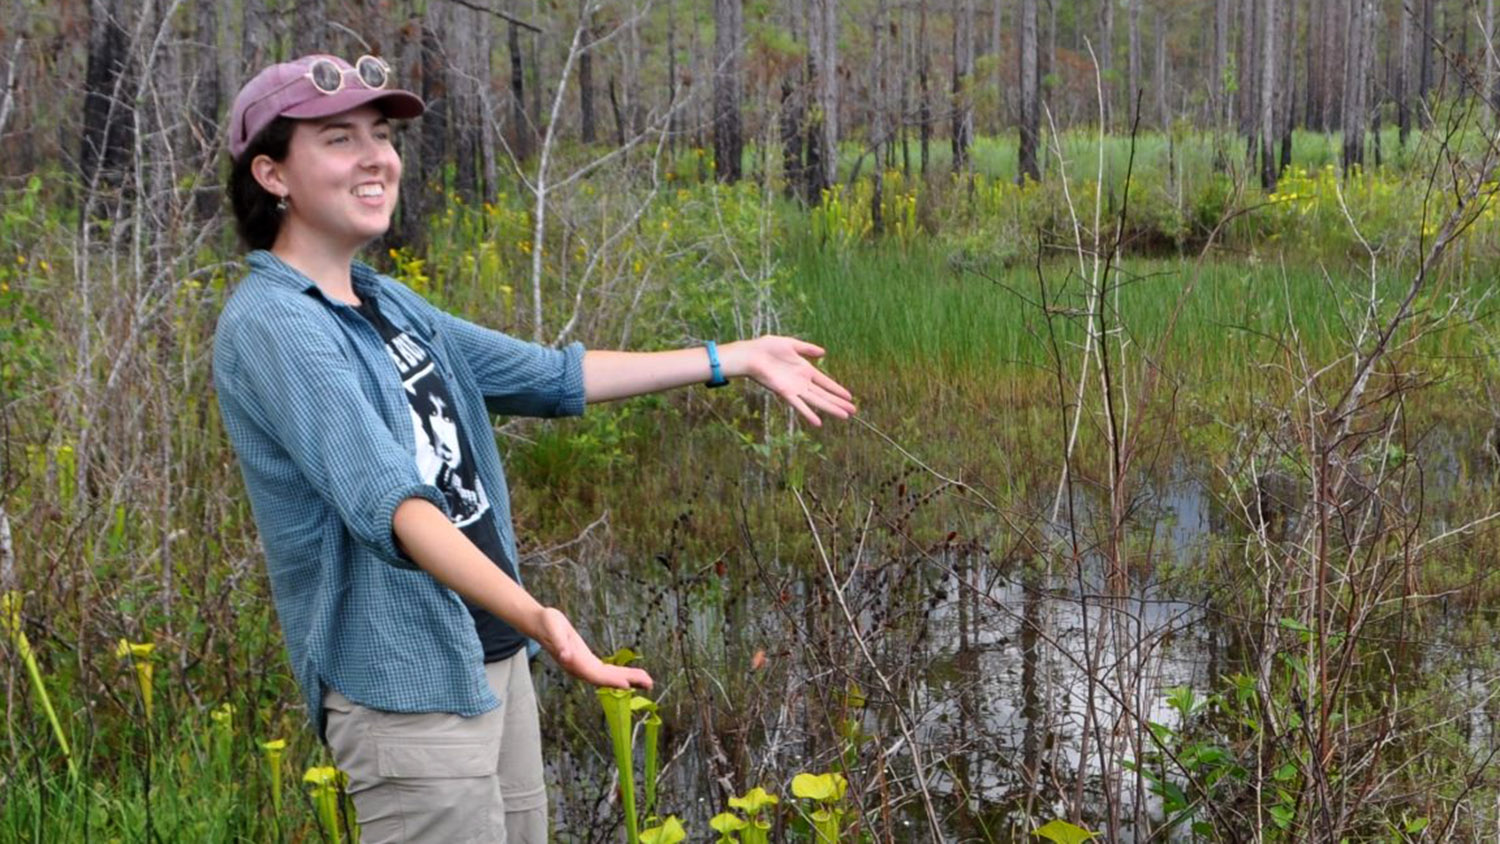 A scientist stands in a swamp, arms outstretched, looking happy.